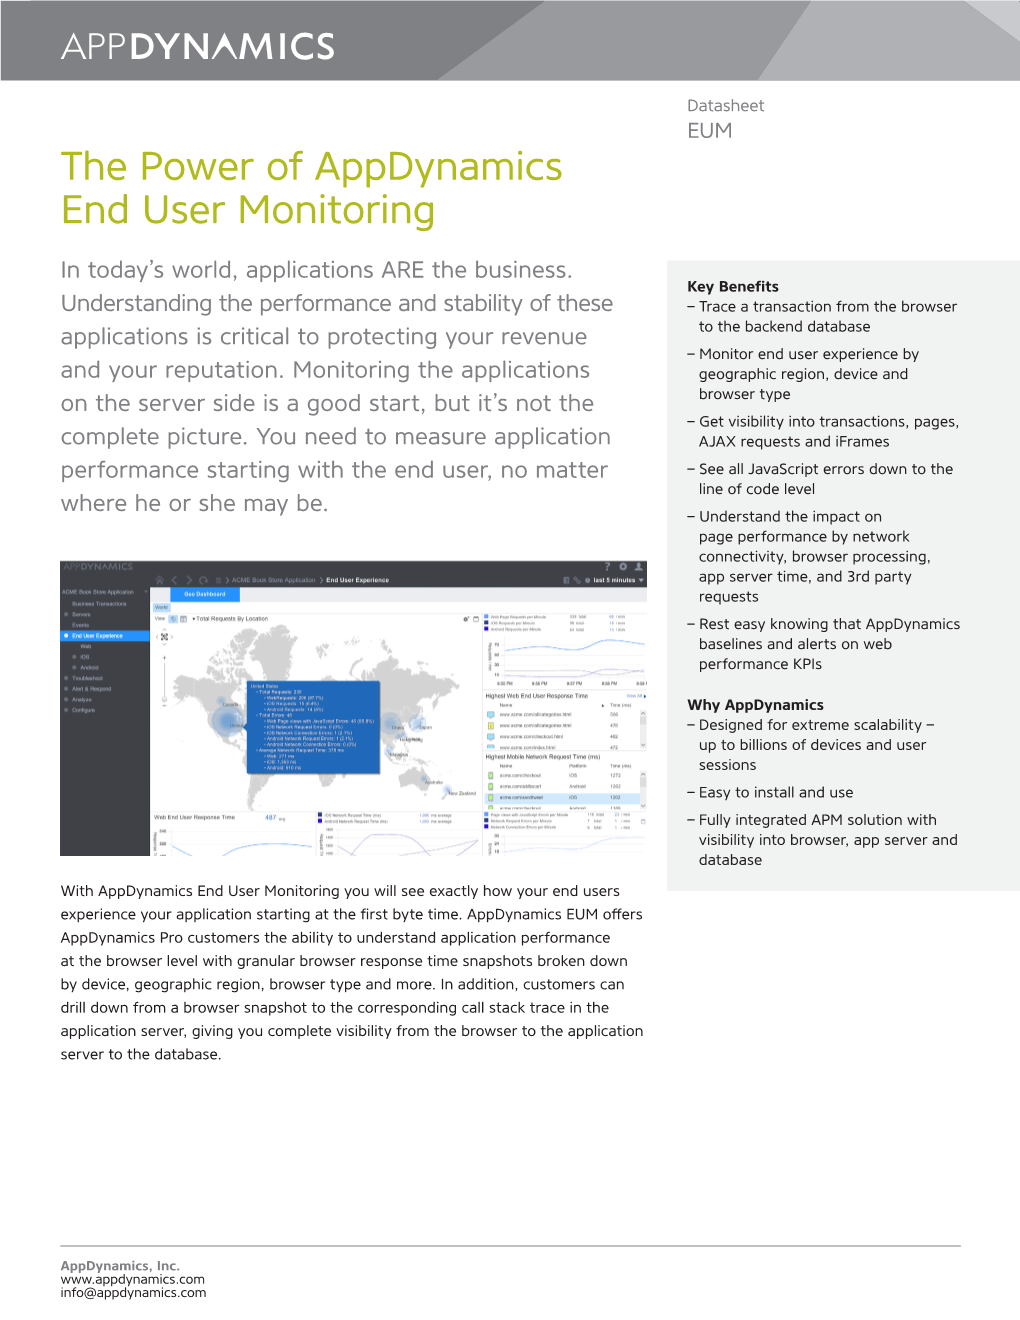 The Power of Appdynamics End User Monitoring